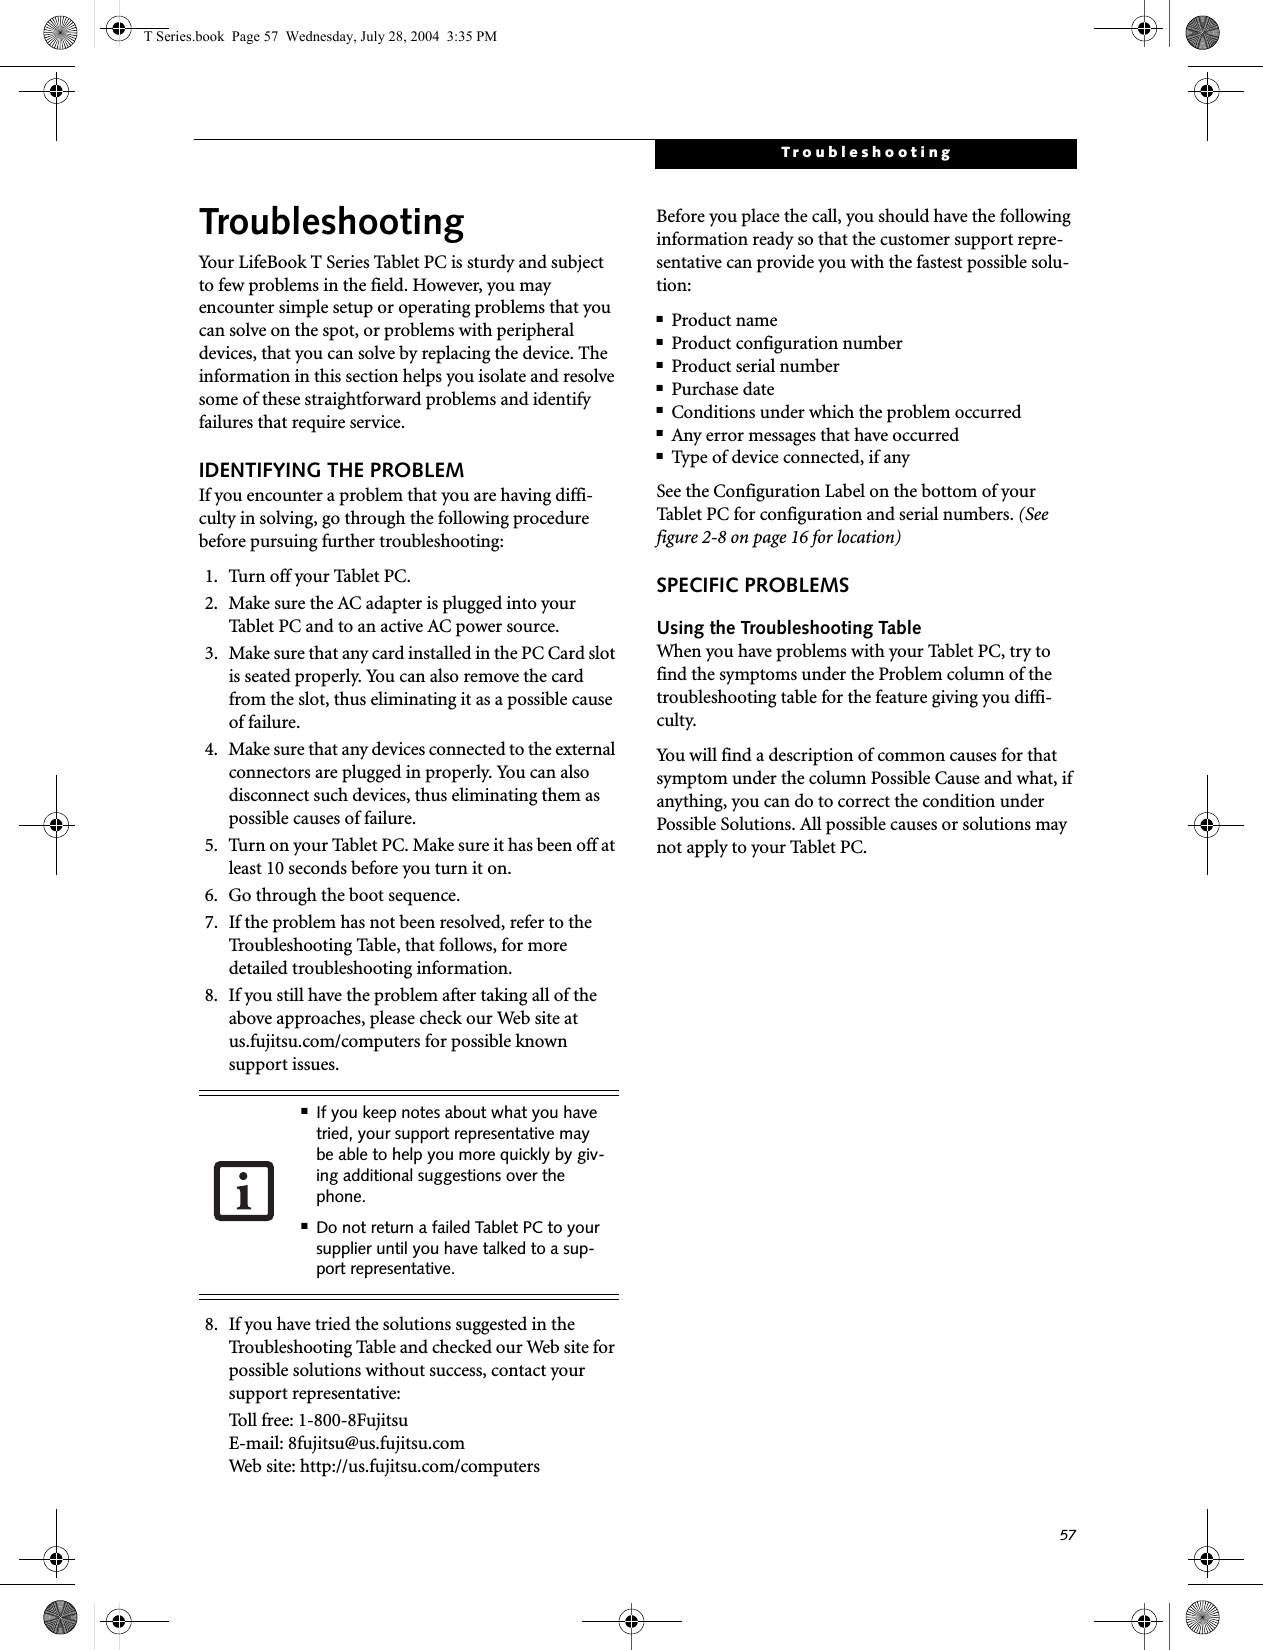 57TroubleshootingTroubleshootingYour LifeBook T Series Tablet PC is sturdy and subject to few problems in the field. However, you may encounter simple setup or operating problems that you can solve on the spot, or problems with peripheral devices, that you can solve by replacing the device. The information in this section helps you isolate and resolve some of these straightforward problems and identify failures that require service.IDENTIFYING THE PROBLEMIf you encounter a problem that you are having diffi-culty in solving, go through the following procedure before pursuing further troubleshooting:1. Turn off your Tablet PC.2. Make sure the AC adapter is plugged into your Tablet PC and to an active AC power source.3. Make sure that any card installed in the PC Card slot is seated properly. You can also remove the card from the slot, thus eliminating it as a possible cause of failure.4. Make sure that any devices connected to the external connectors are plugged in properly. You can also disconnect such devices, thus eliminating them as possible causes of failure.5. Turn on your Tablet PC. Make sure it has been off at least 10 seconds before you turn it on.6. Go through the boot sequence.7. If the problem has not been resolved, refer to the Troubleshooting Table, that follows, for more detailed troubleshooting information.8. If you still have the problem after taking all of the above approaches, please check our Web site at us.fujitsu.com/computers for possible known support issues. 8. If you have tried the solutions suggested in the Troubleshooting Table and checked our Web site for possible solutions without success, contact your support representative: Toll free: 1-800-8Fujitsu E-mail: 8fujitsu@us.fujitsu.comWeb site: http://us.fujitsu.com/computersBefore you place the call, you should have the following information ready so that the customer support repre-sentative can provide you with the fastest possible solu-tion:■Product name■Product configuration number■Product serial number■Purchase date■Conditions under which the problem occurred■Any error messages that have occurred■Type of device connected, if anySee the Configuration Label on the bottom of yourTablet PC for configuration and serial numbers. (See figure 2-8 on page 16 for location)SPECIFIC PROBLEMSUsing the Troubleshooting TableWhen you have problems with your Tablet PC, try to find the symptoms under the Problem column of the troubleshooting table for the feature giving you diffi-culty. You will find a description of common causes for that symptom under the column Possible Cause and what, if anything, you can do to correct the condition under Possible Solutions. All possible causes or solutions may not apply to your Tablet PC.■If you keep notes about what you have tried, your support representative may be able to help you more quickly by giv-ing additional suggestions over the phone.■Do not return a failed Tablet PC to your supplier until you have talked to a sup-port representative.T Series.book  Page 57  Wednesday, July 28, 2004  3:35 PM